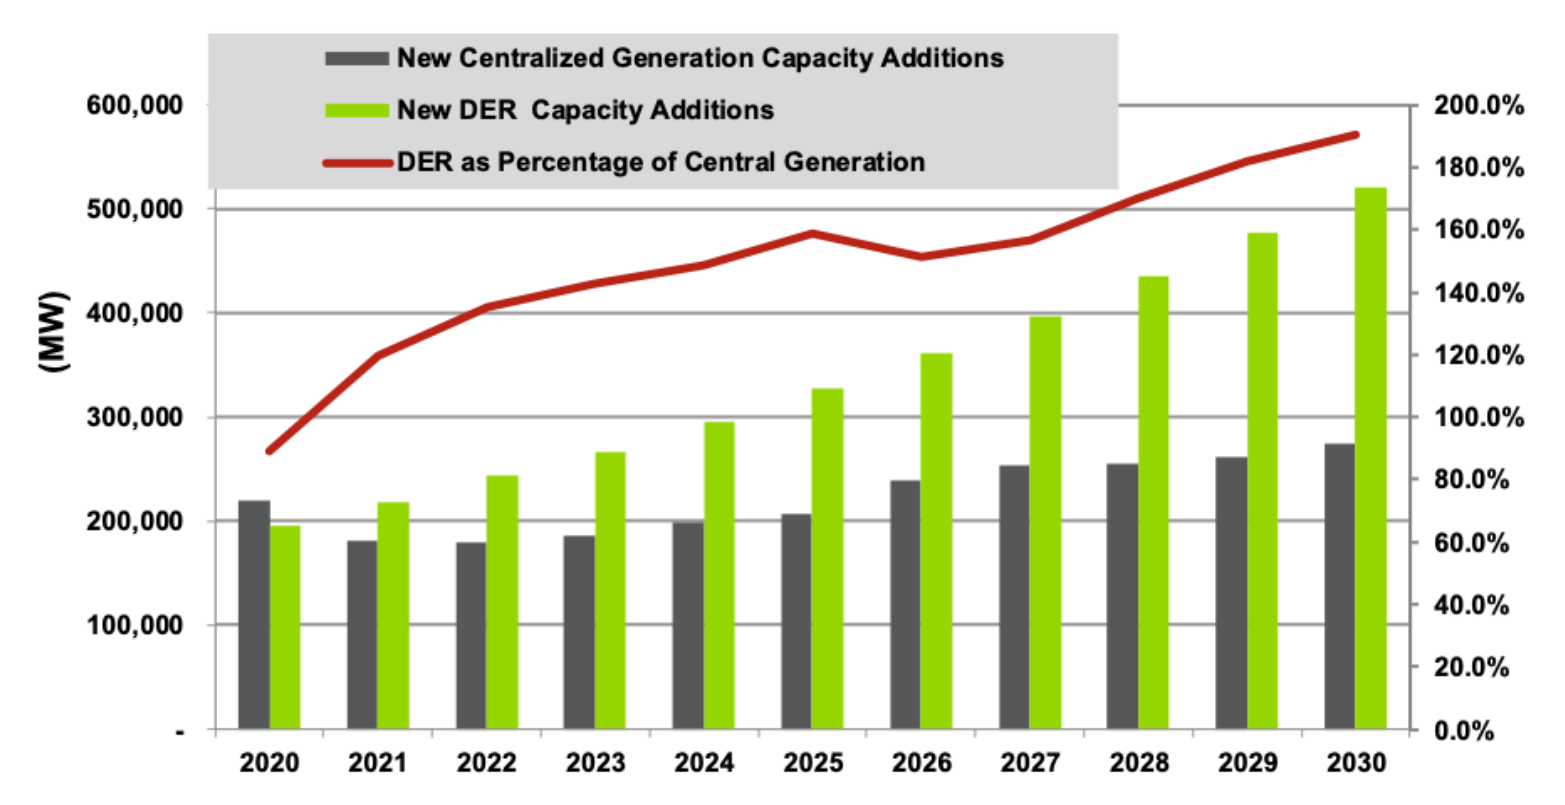 DERs Are Growing Faster Than Centralized Generation around the world